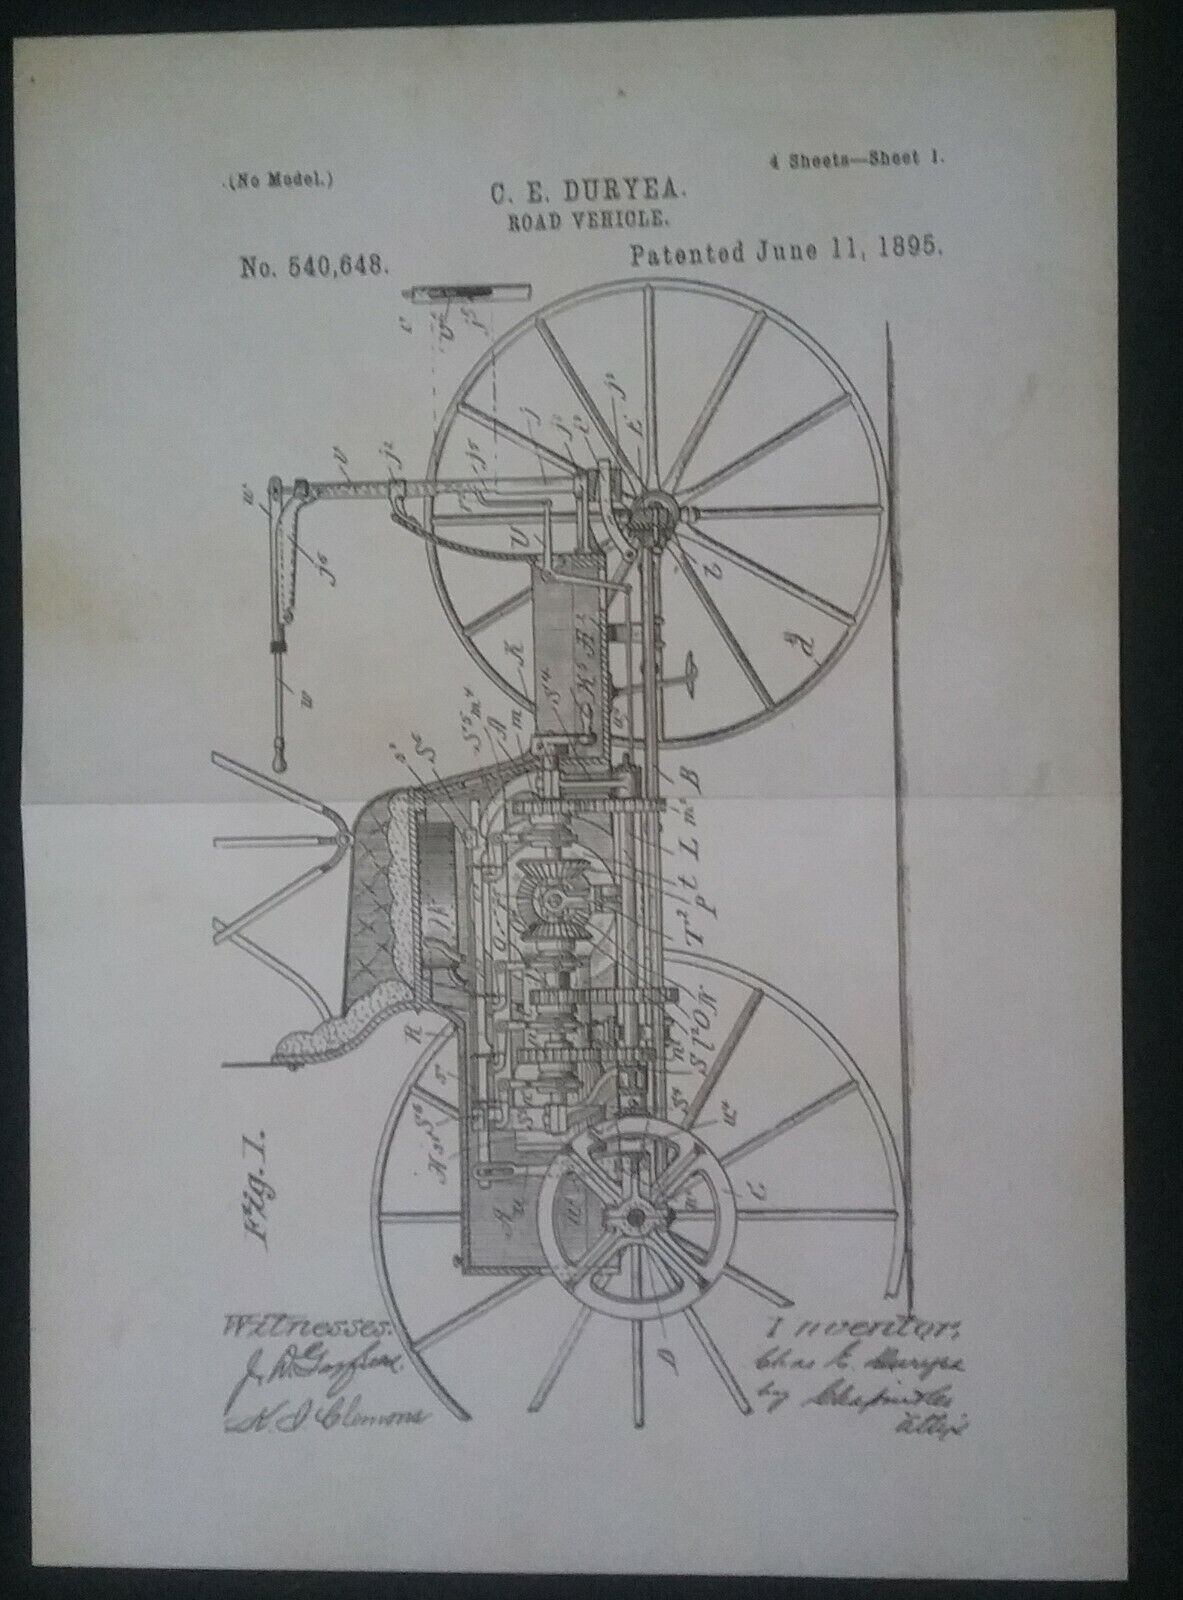 THE DURYEA PATENT : REPRODUCTION OF THE 1895 PATENT : AMERICAN FRANK DURYEA  (2)